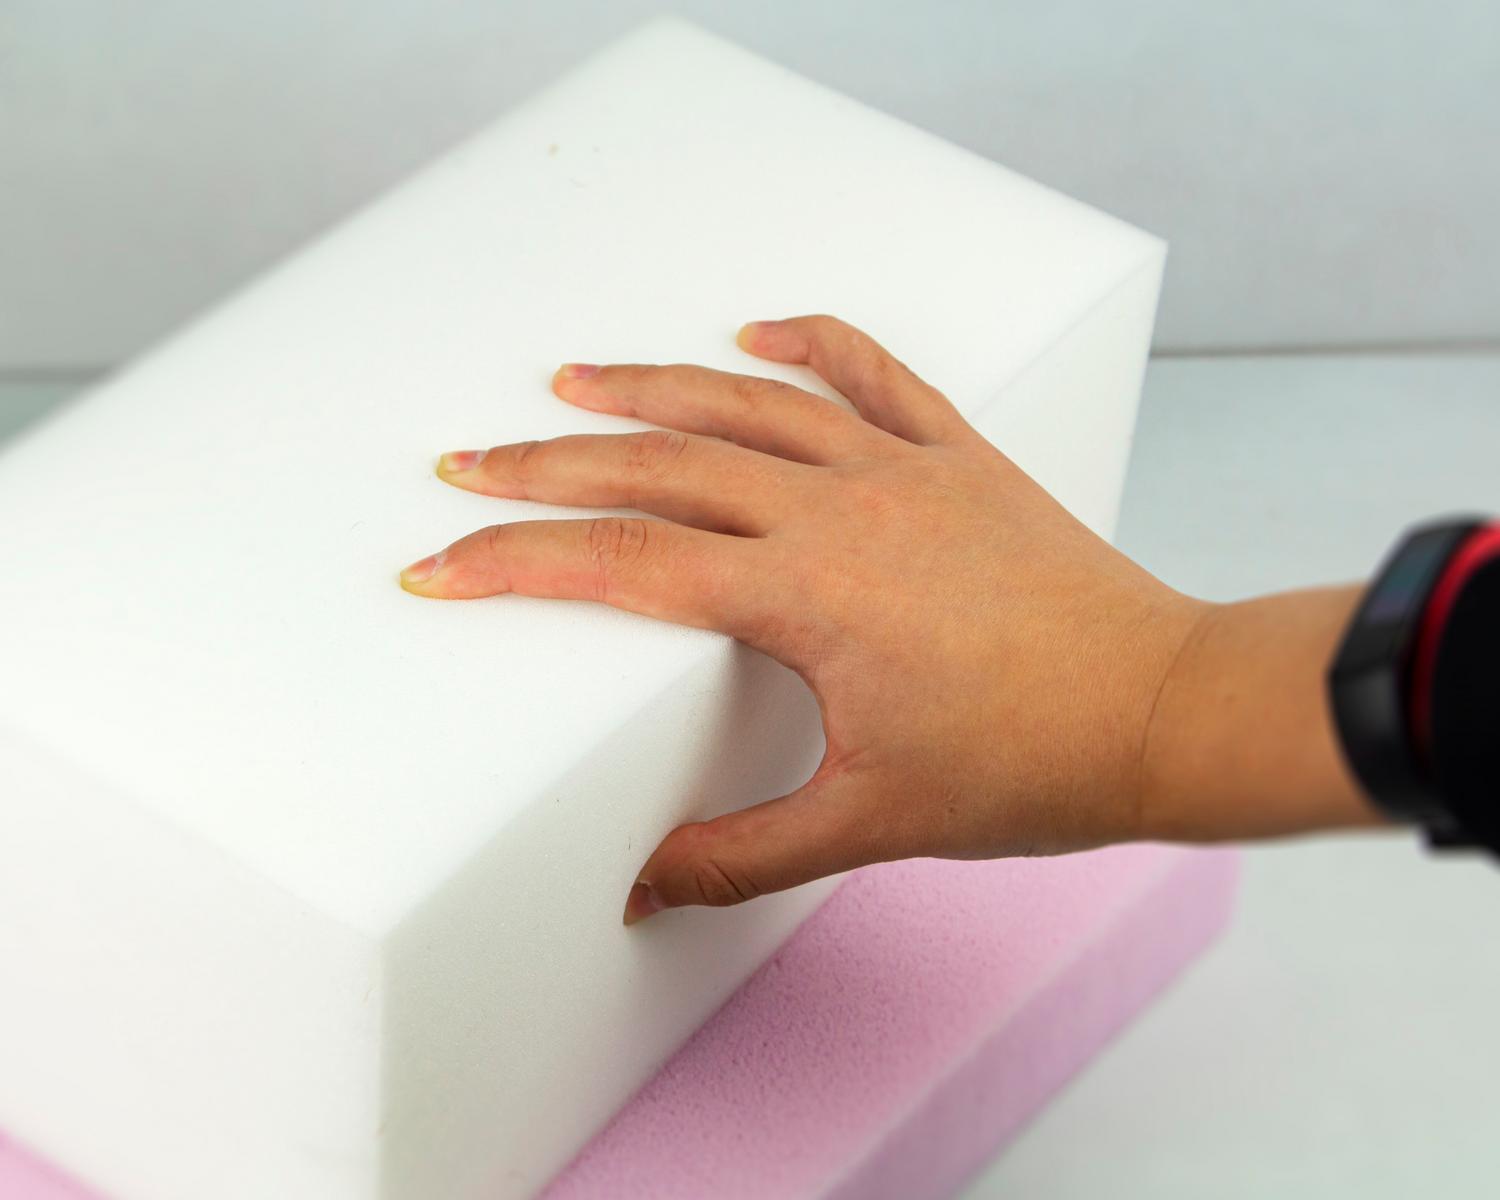 Close-up of a hand pressing into a block of Reflex foam, showcasing its firm and springy properties.